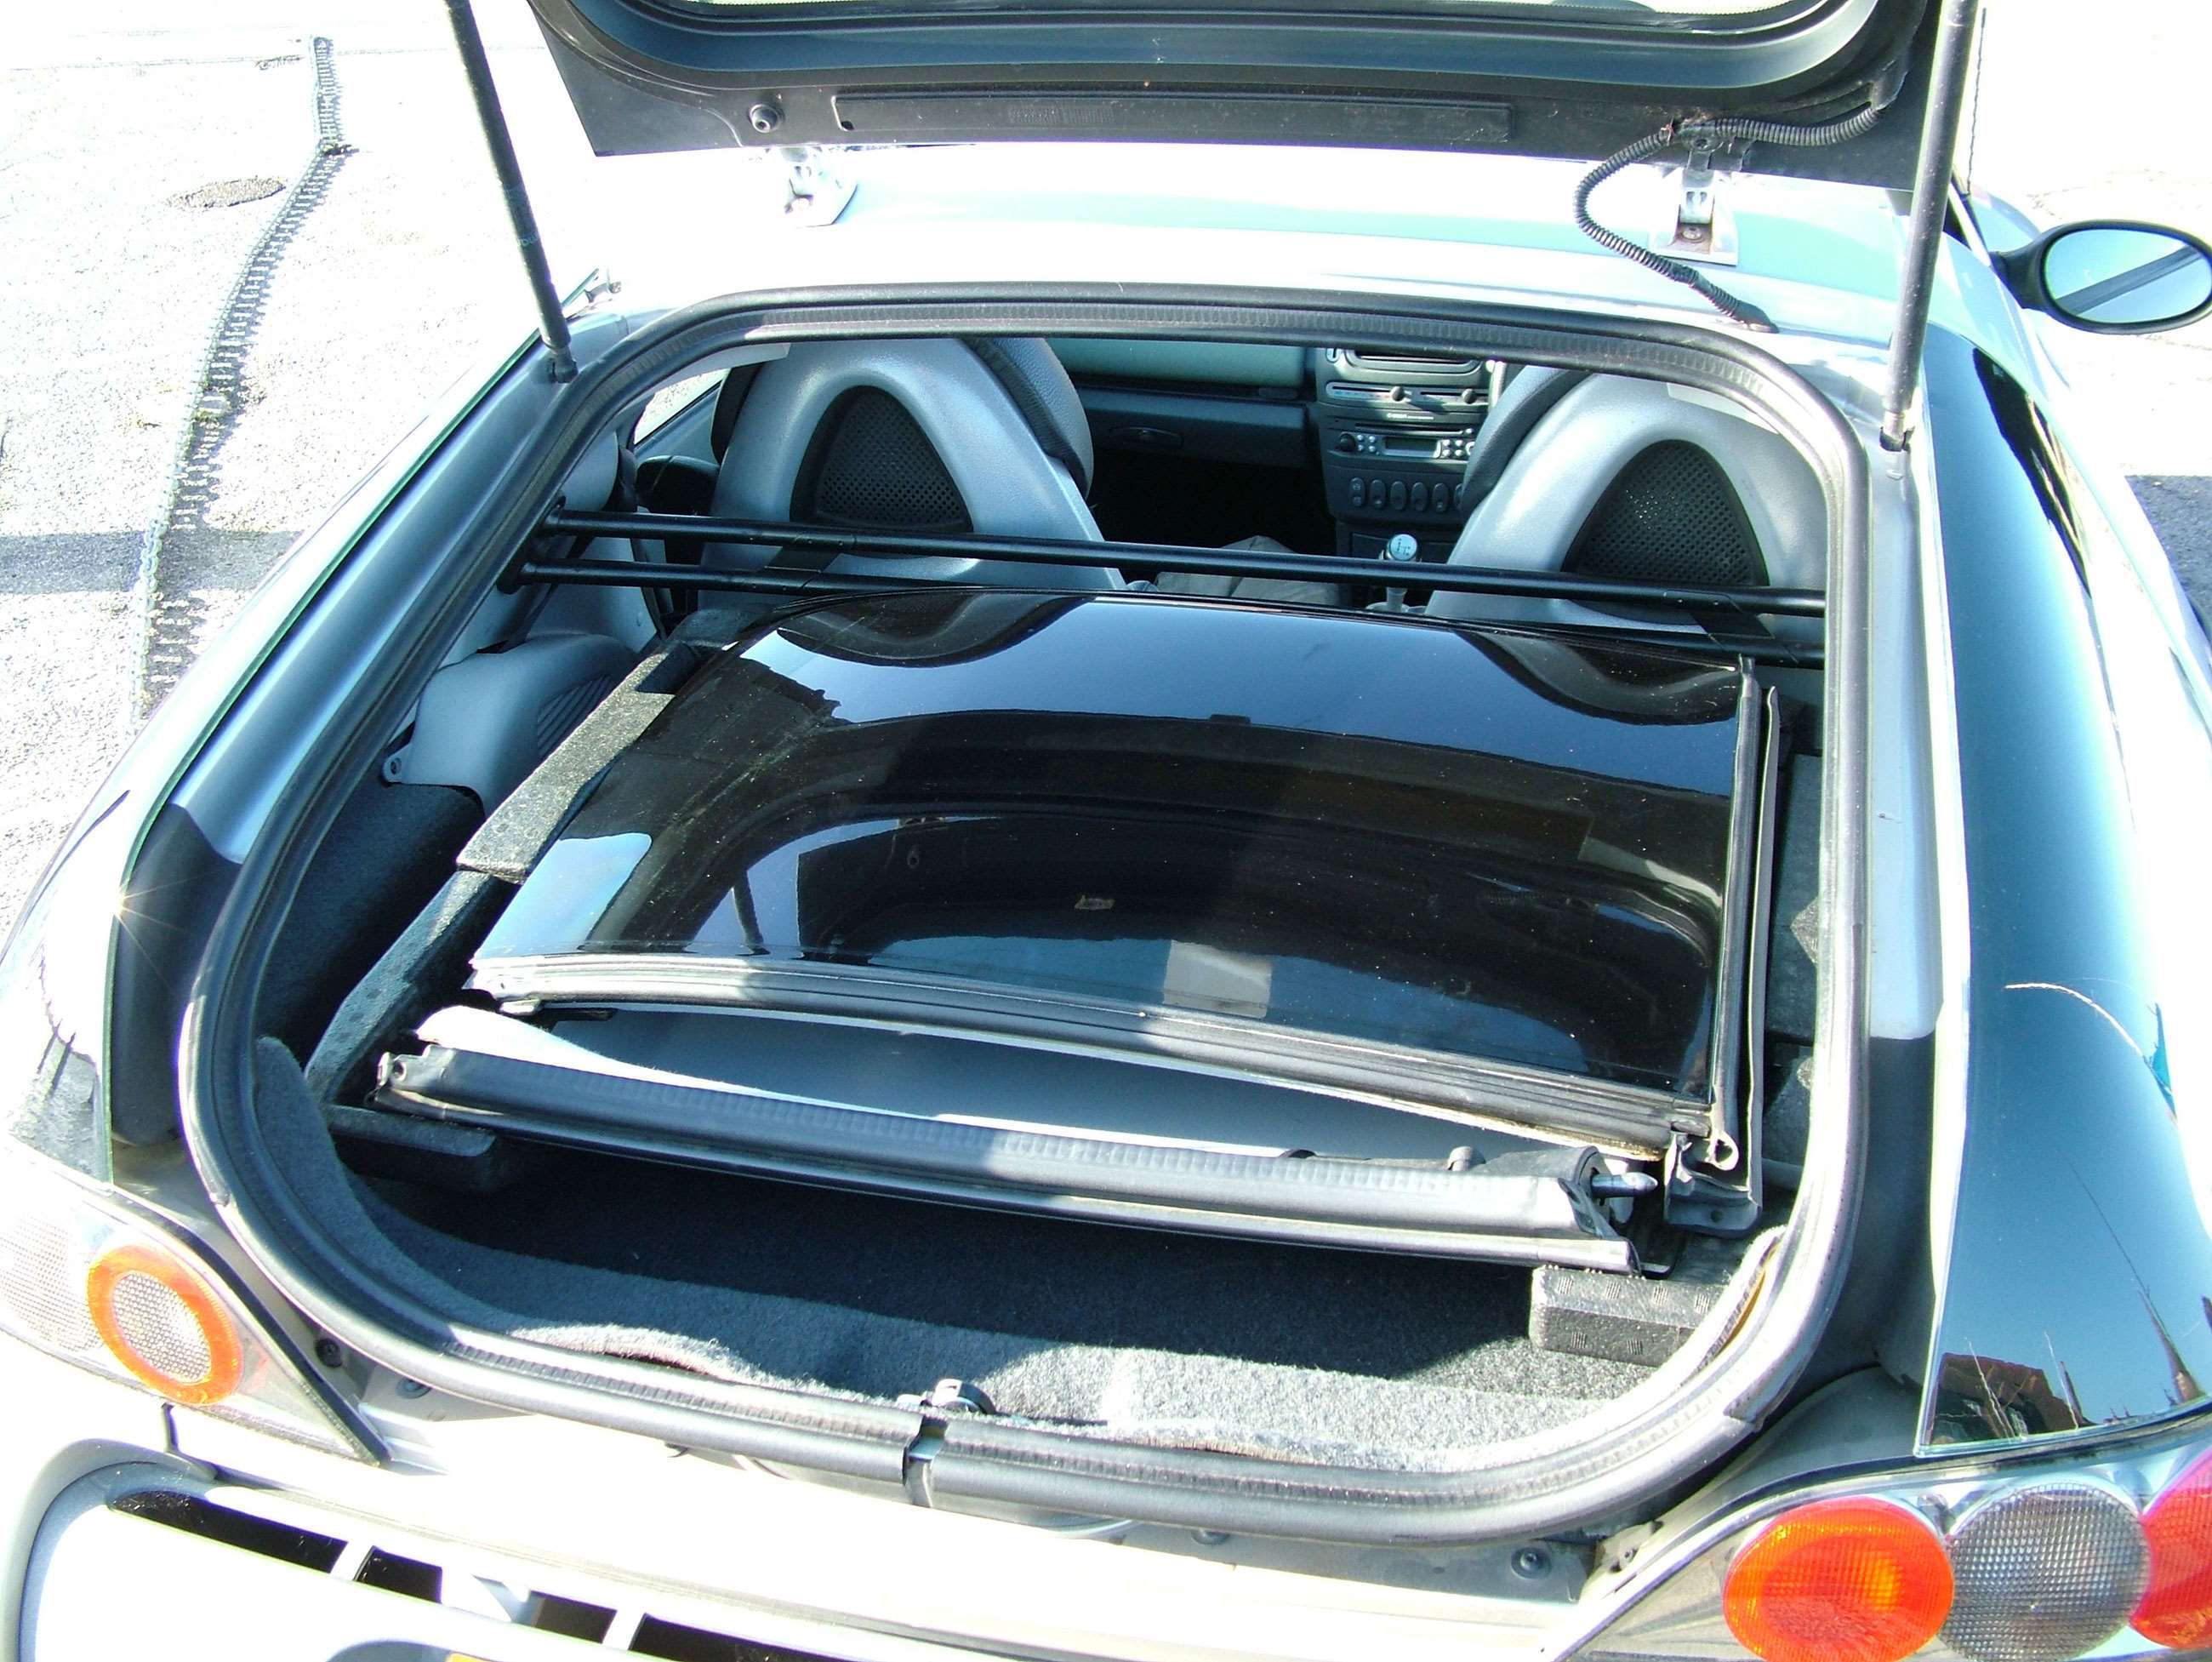 smart-roadster-coupe-roof-12012022.jpg